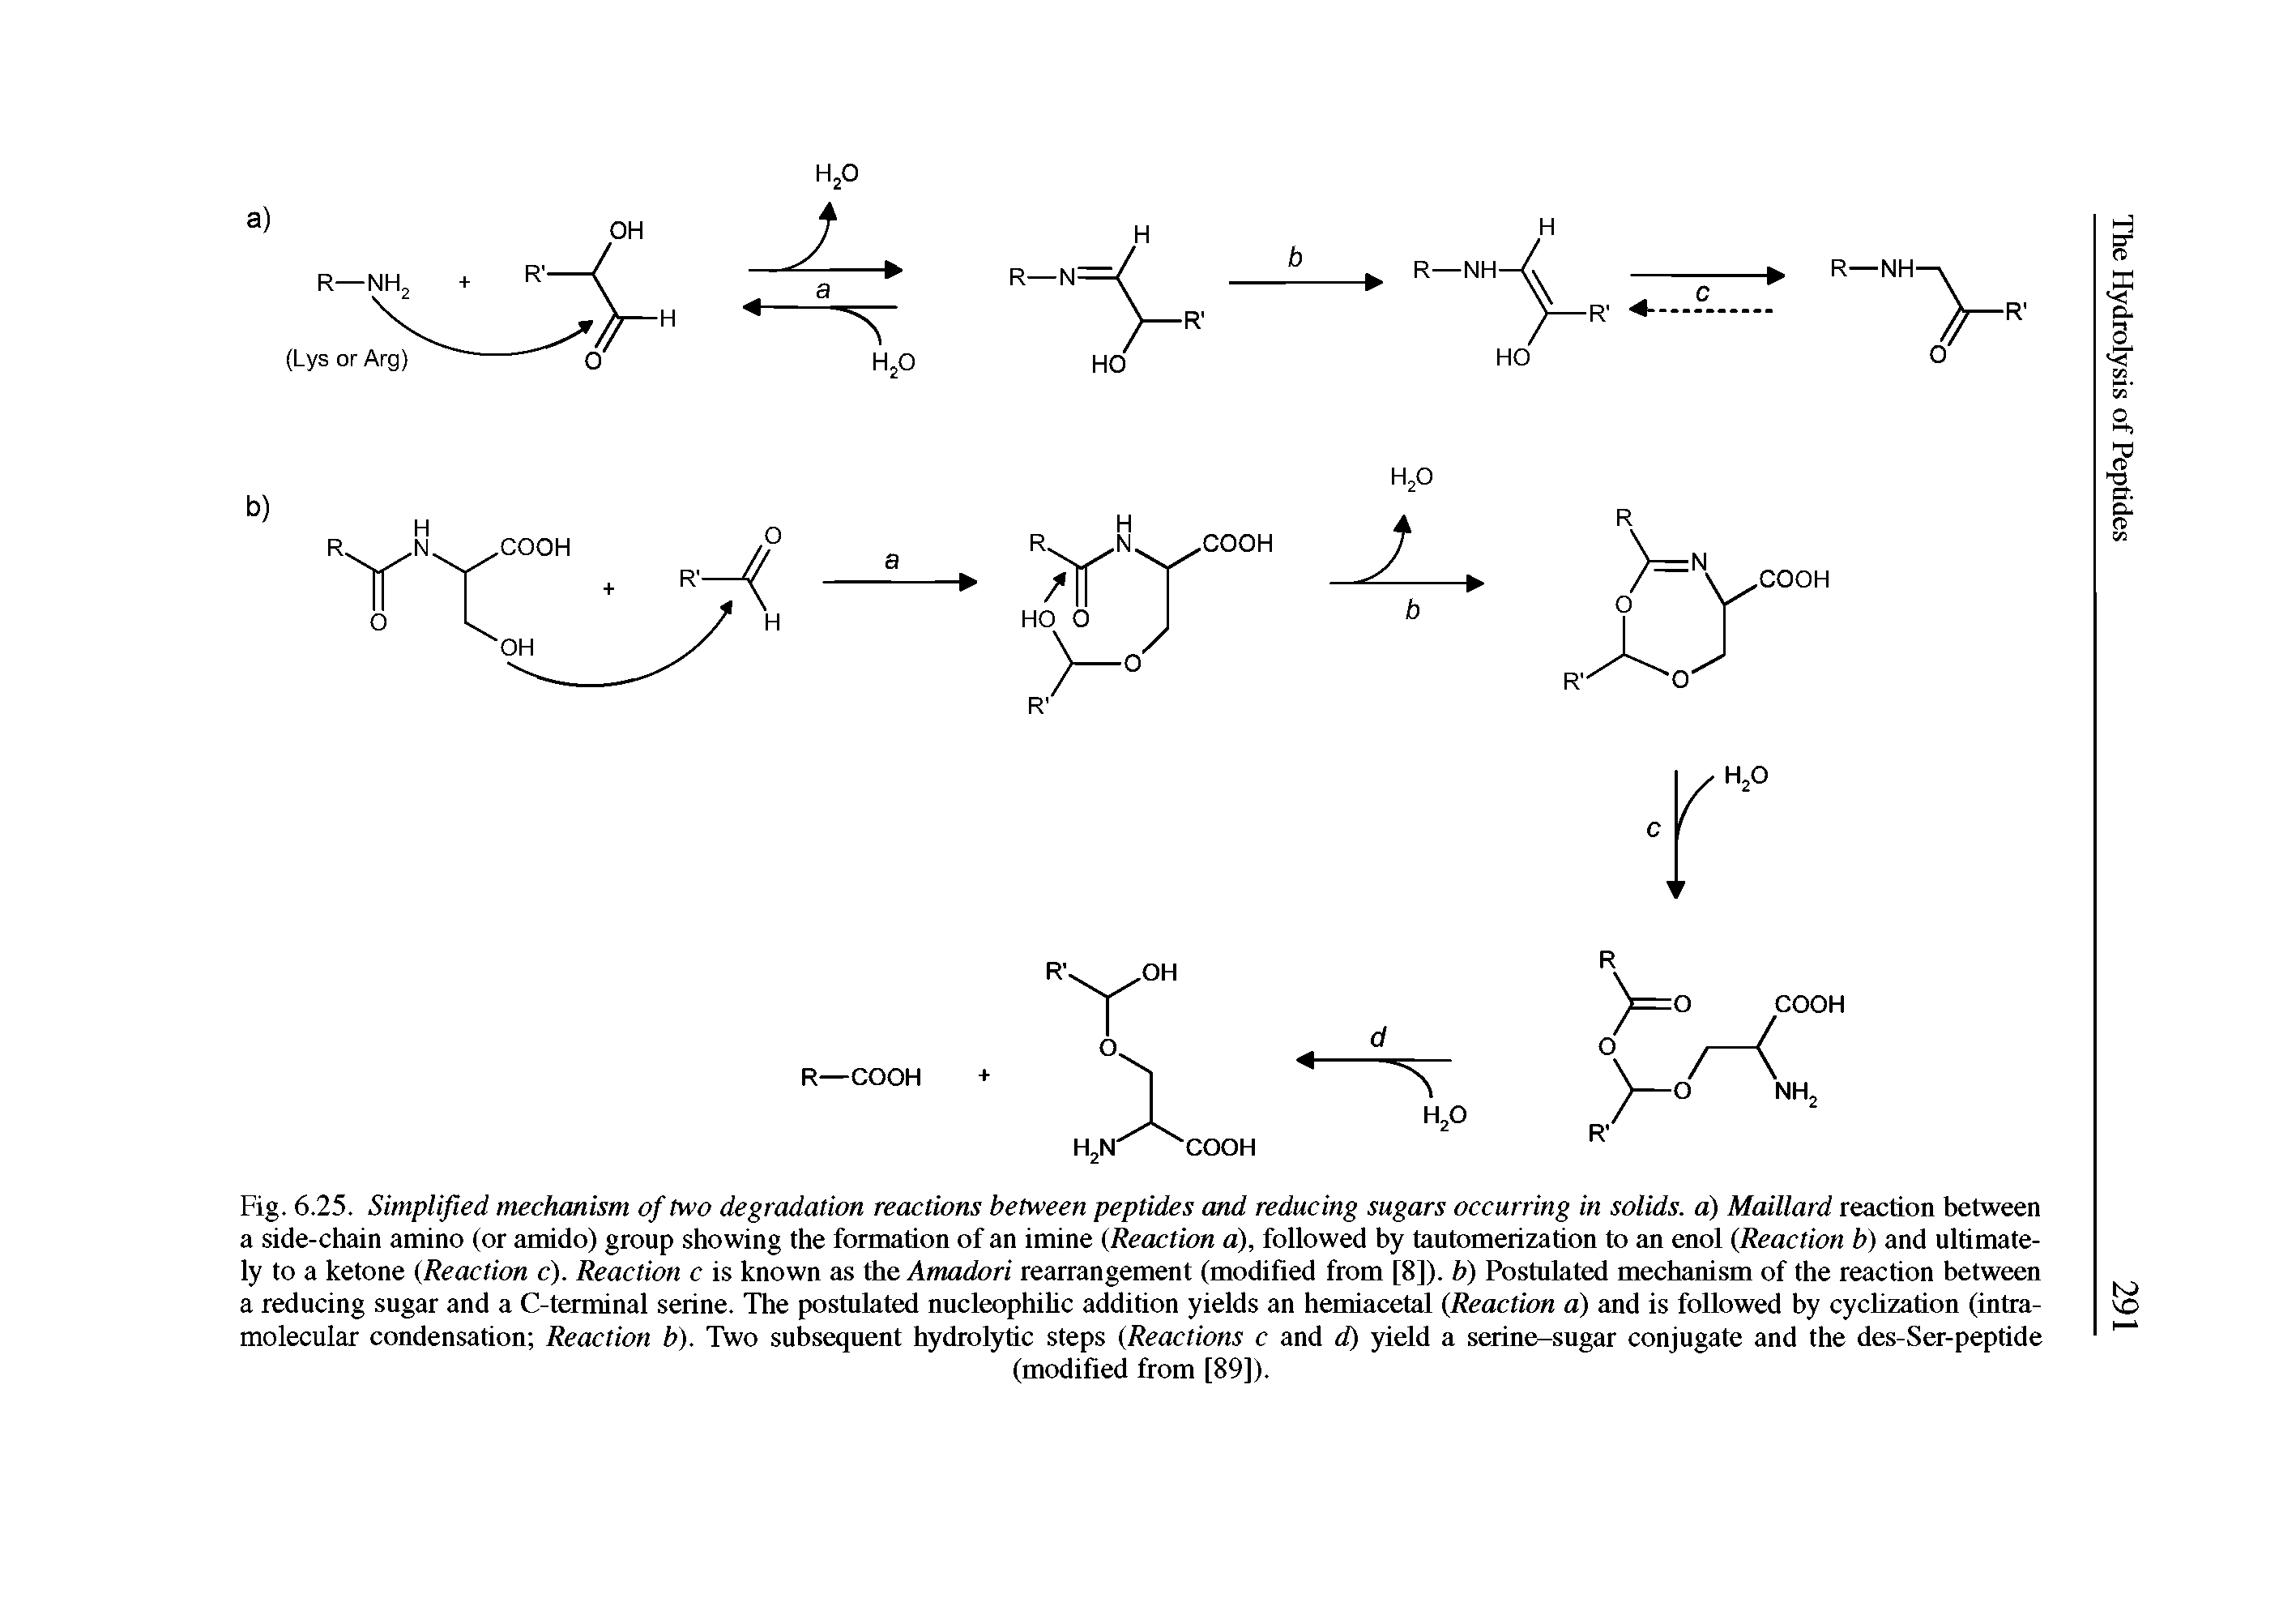 Fig. 6.25. Simplified mechanism of two degradation reactions between peptides and reducing sugars occurring in solids, a) Maillard reaction between a side-chain amino (or amido) group showing the formation of an imine (Reaction a), followed by tautomerization to an enol (Reaction b) and ultimately to a ketone (Reaction c). Reaction c is known as the Amadori rearrangement (modified from [8]). b) Postulated mechanism of the reaction between a reducing sugar and a C-terminal serine. The postulated nucleophilic addition yields an hemiacetal (Reaction a) and is followed by cyclization (intramolecular condensation Reaction b). Two subsequent hydrolytic steps (Reactions c and d) yield a serine-sugar conjugate and the des-Ser-peptide...